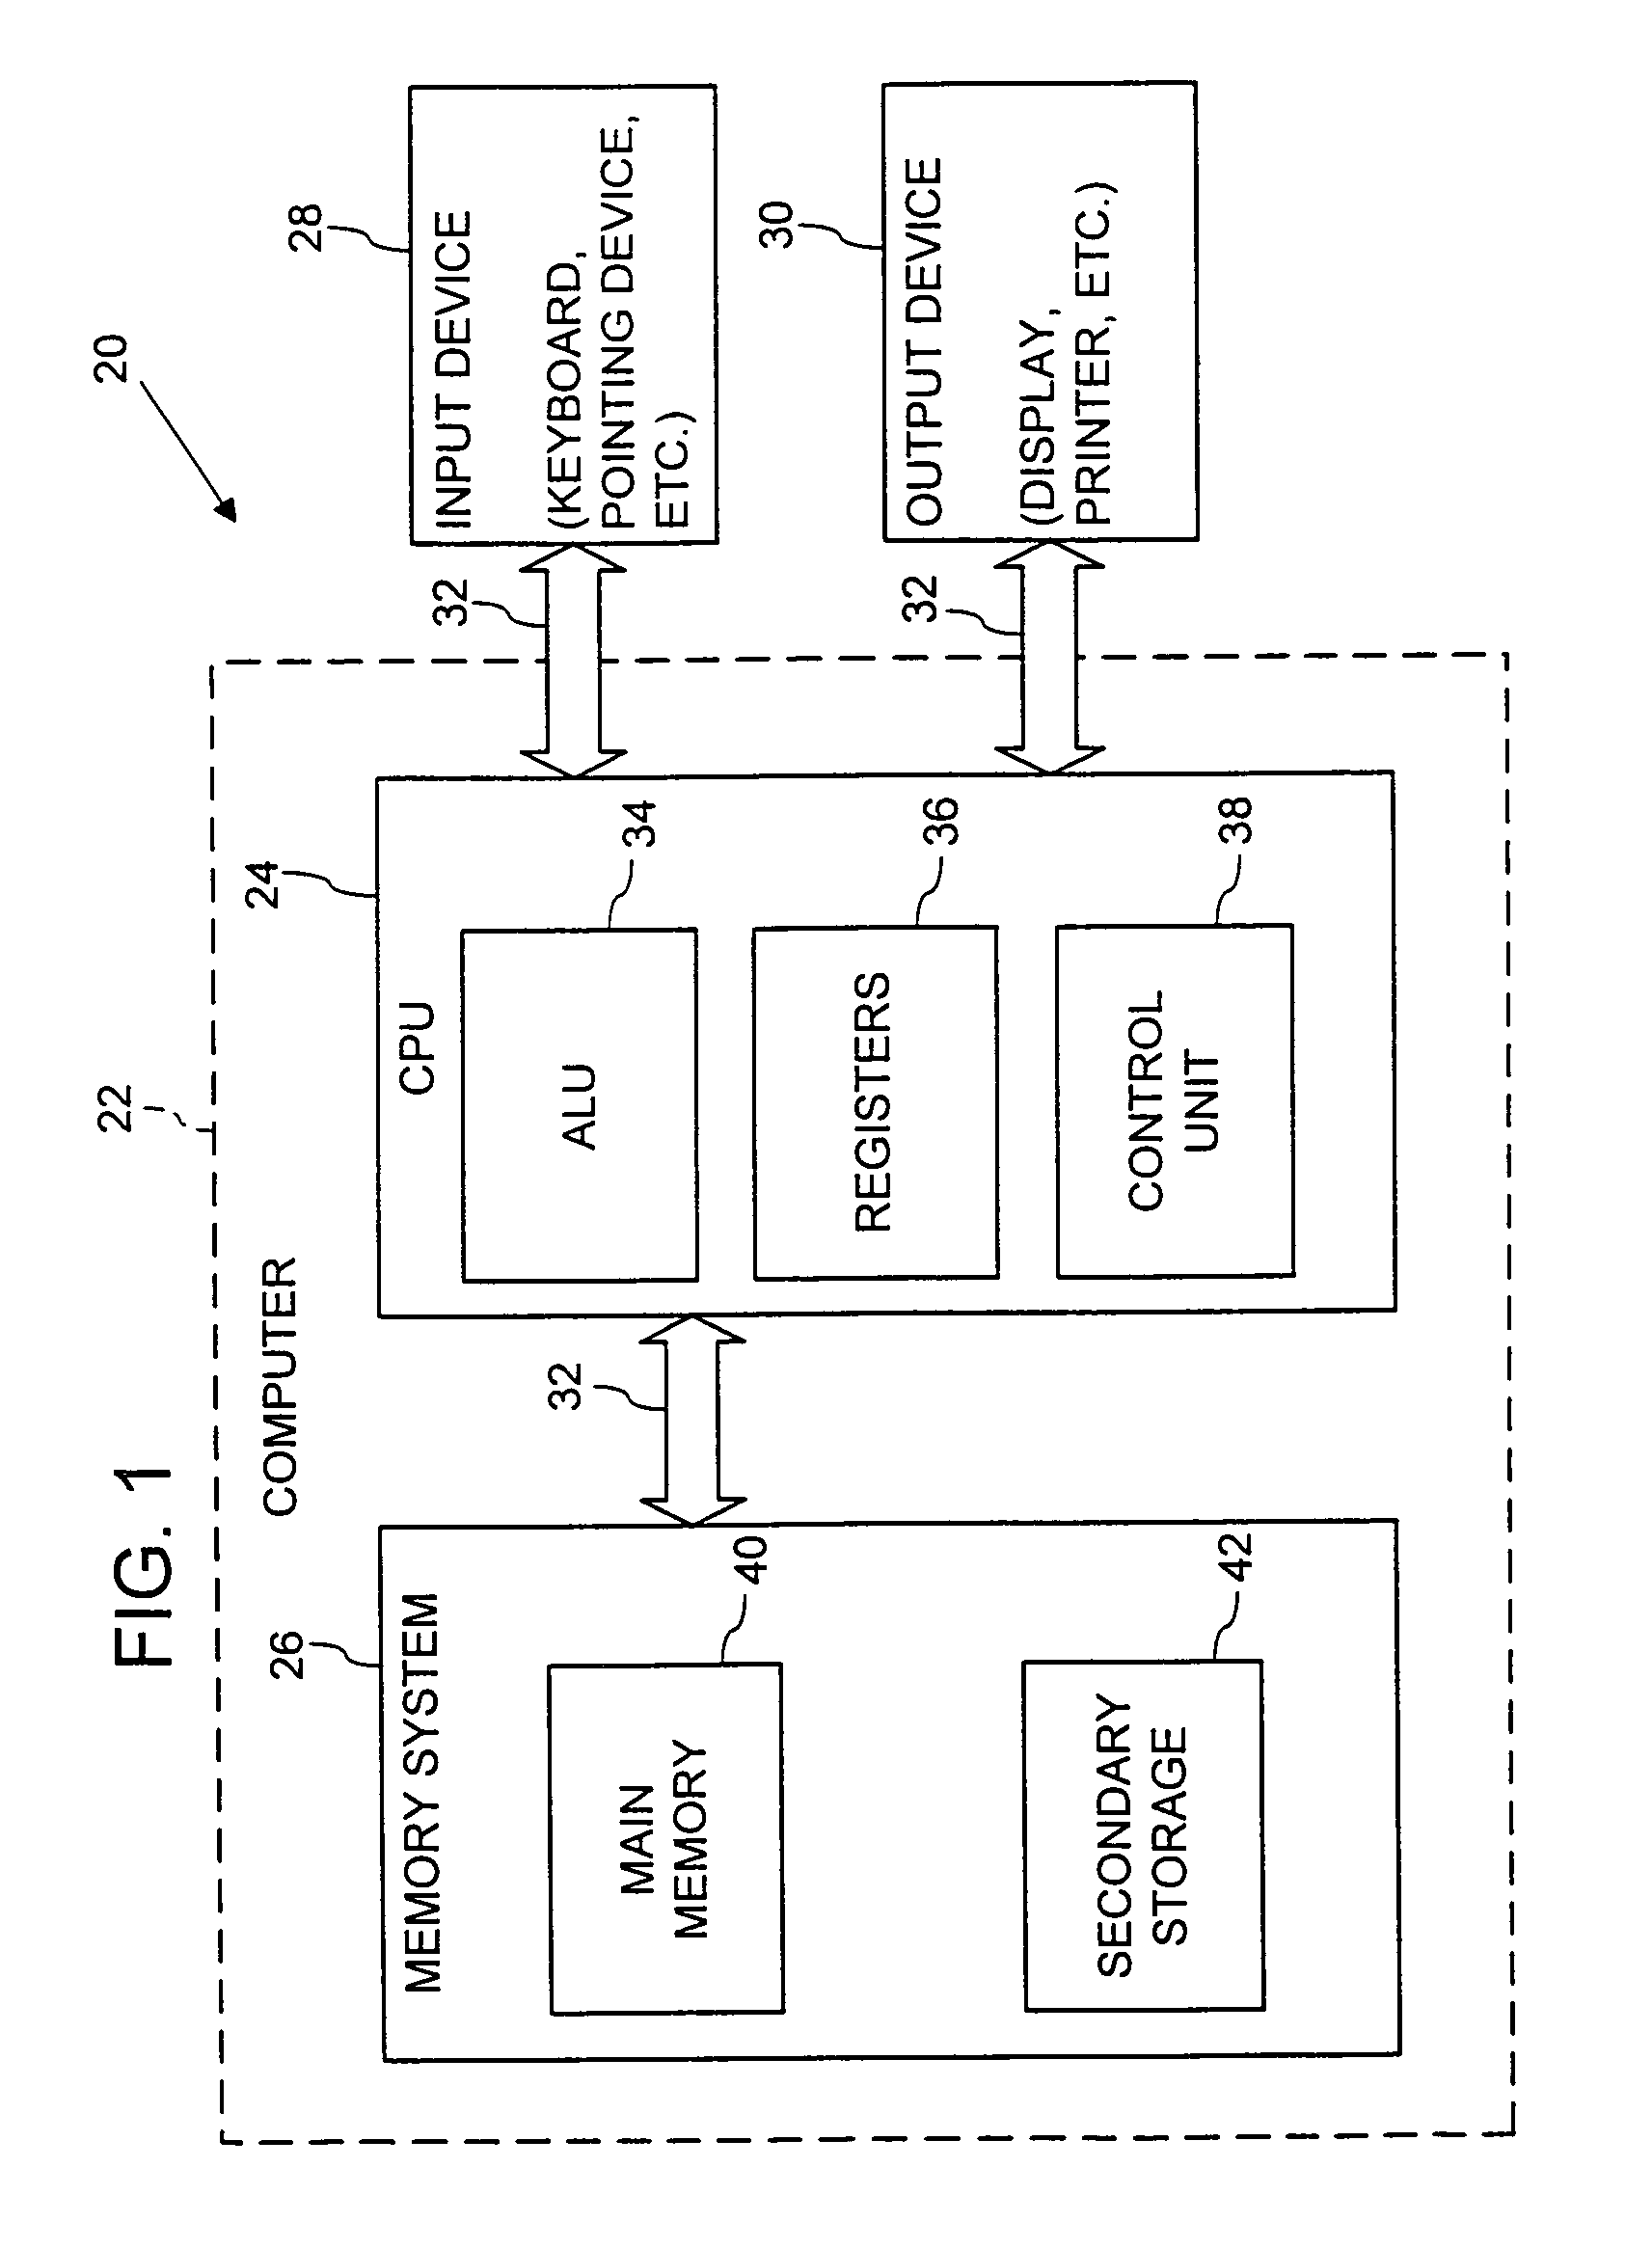 Presentation system with distributed object oriented multi-user domain and separate view and model objects